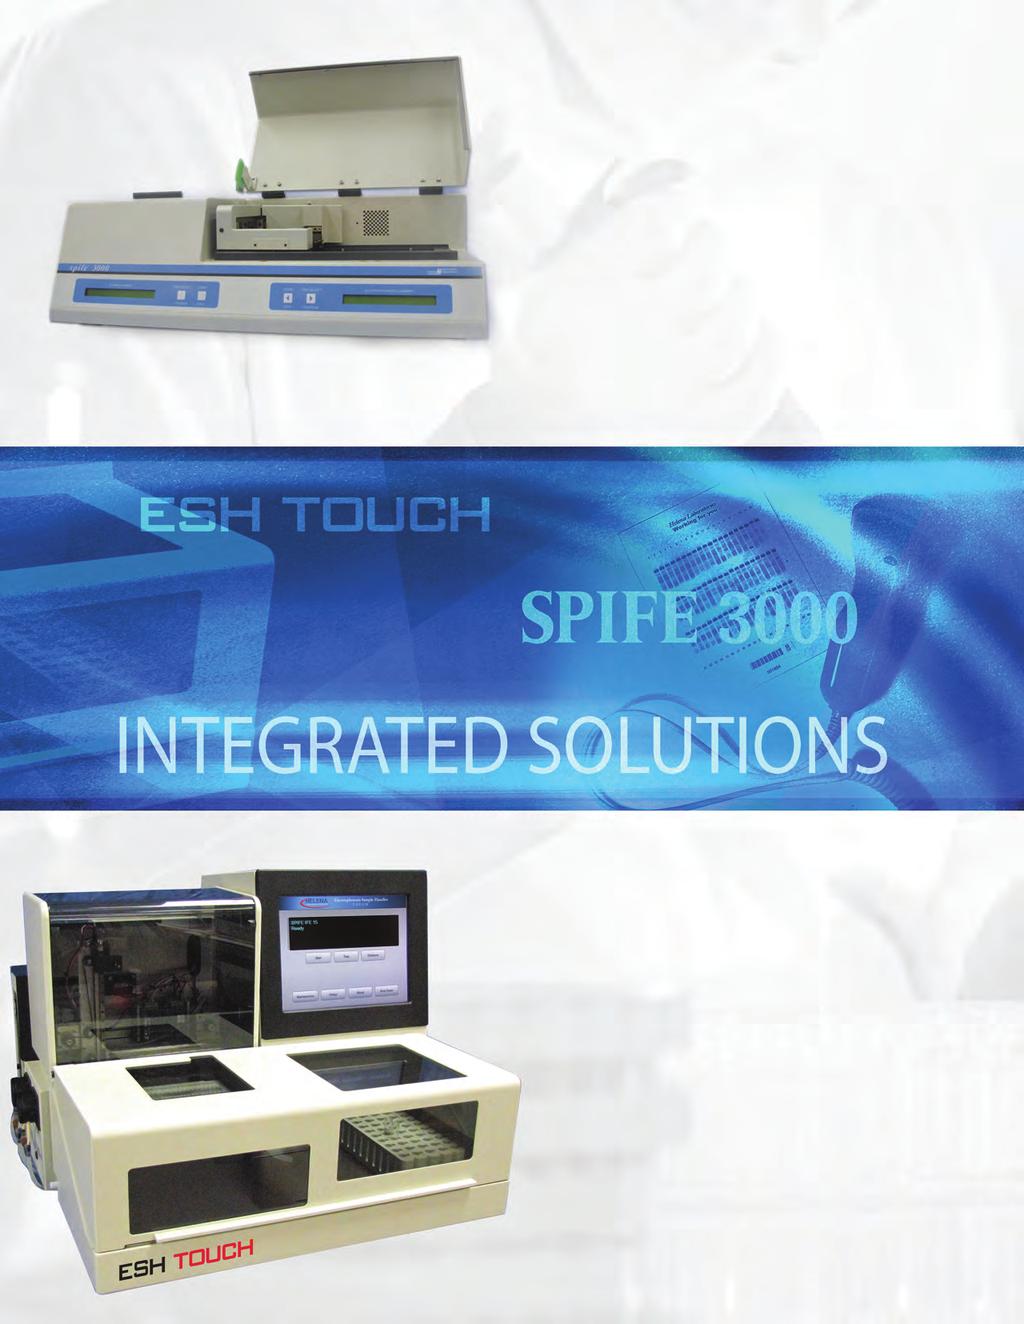 SPIFE 3000 The SPIFE 3000 separates and develops up to 1400 SPE samples or 210 IFE profiles in an 8-hour shift, with integrated sample and reagent application.